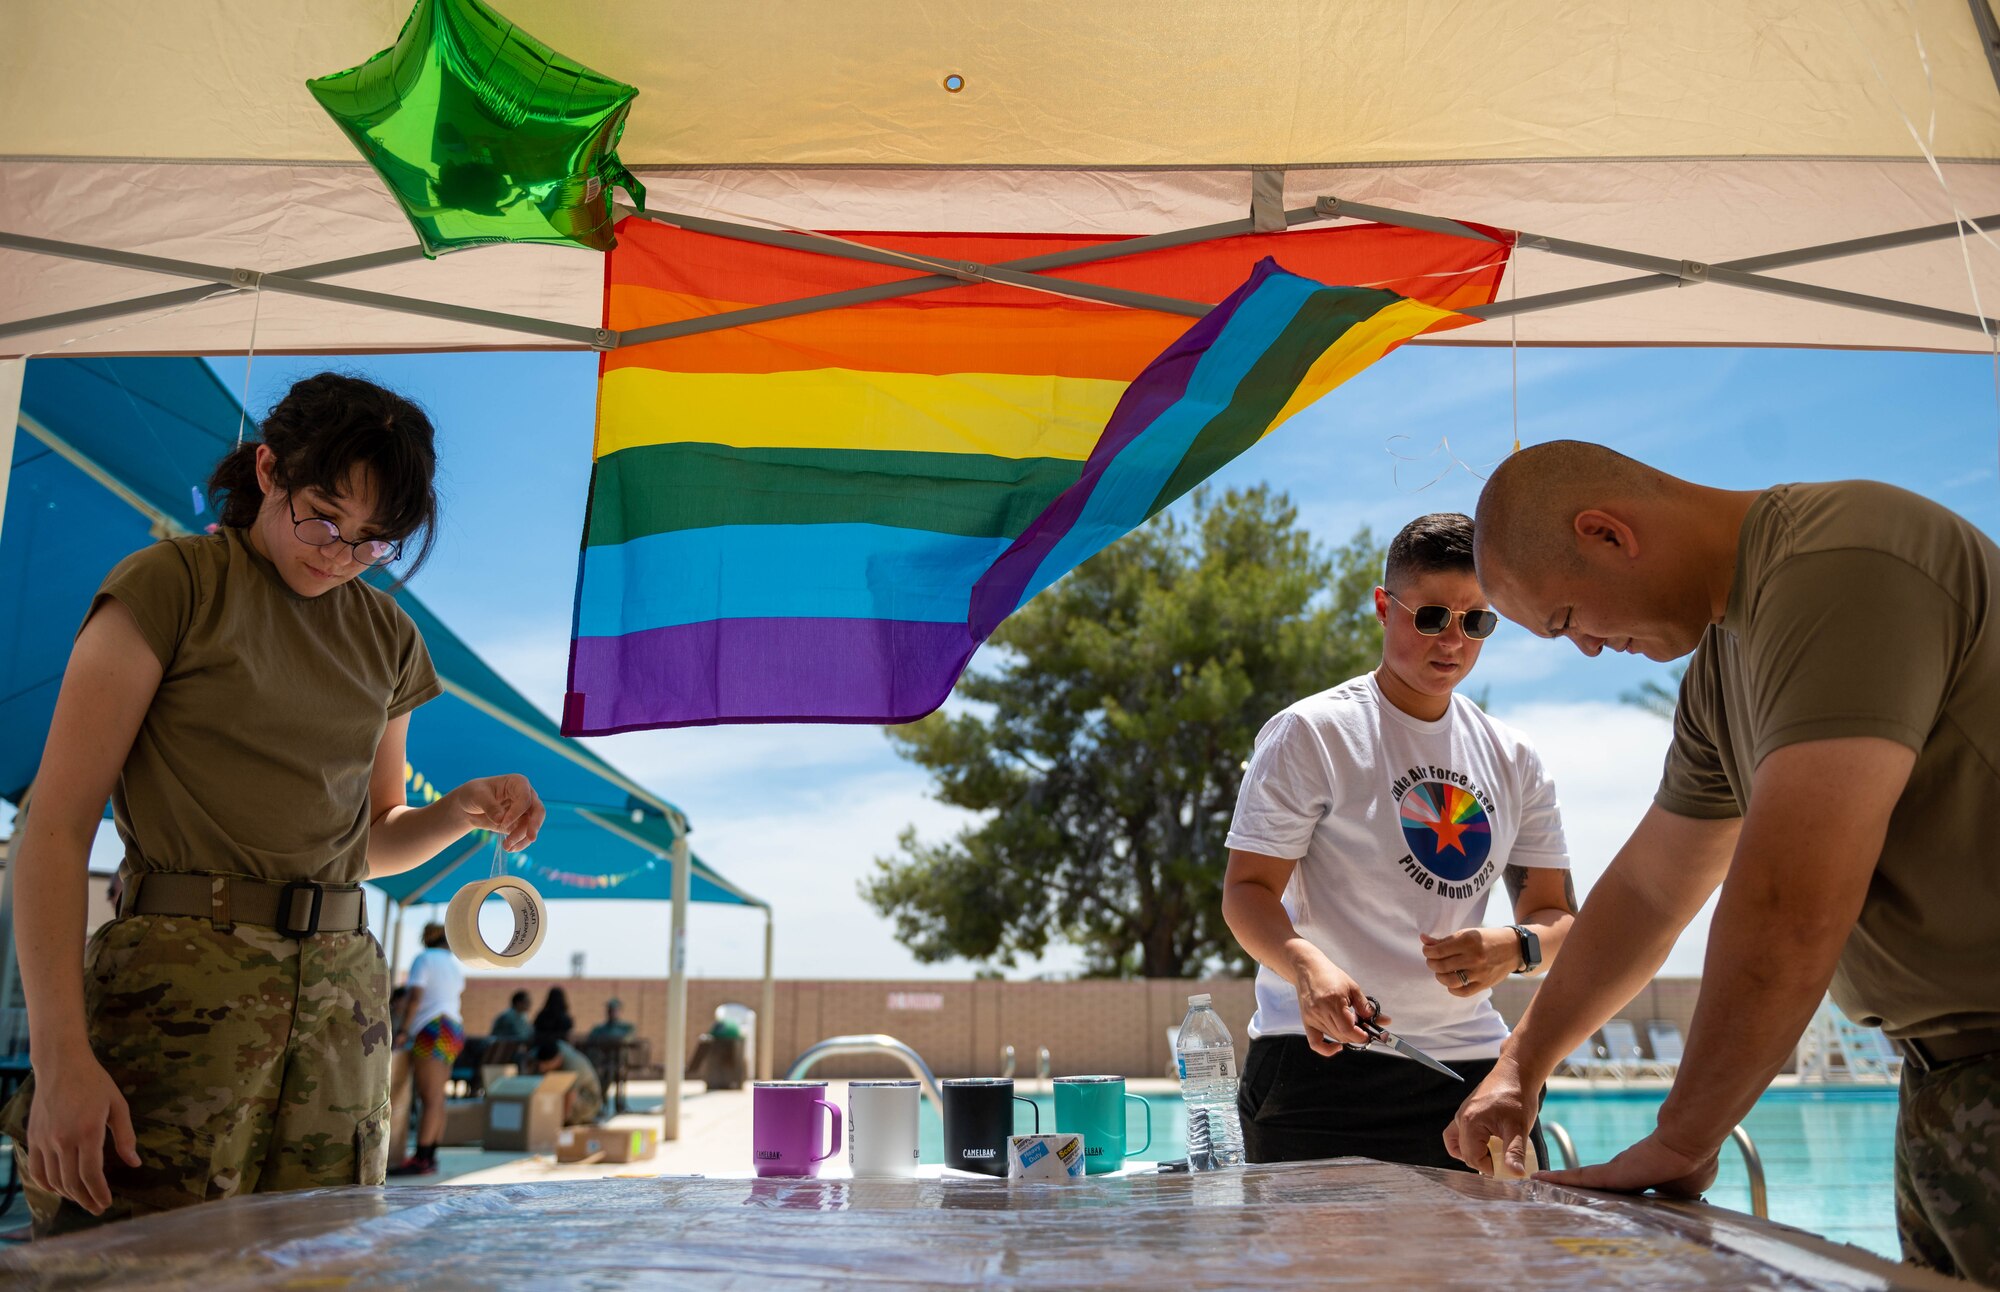 U.S. Air Force Airman 1st Class Ysabella Paris, Master Sgt. Melissa Lord, and Tech. Sgt. Oliver Ocampo, 56th Component Maintenance Squadron personnel, build a cardboard boat during a Pride Month event hosted by the Luke Pride Committee, June 9, 2023, at Luke AFB, Arizona.